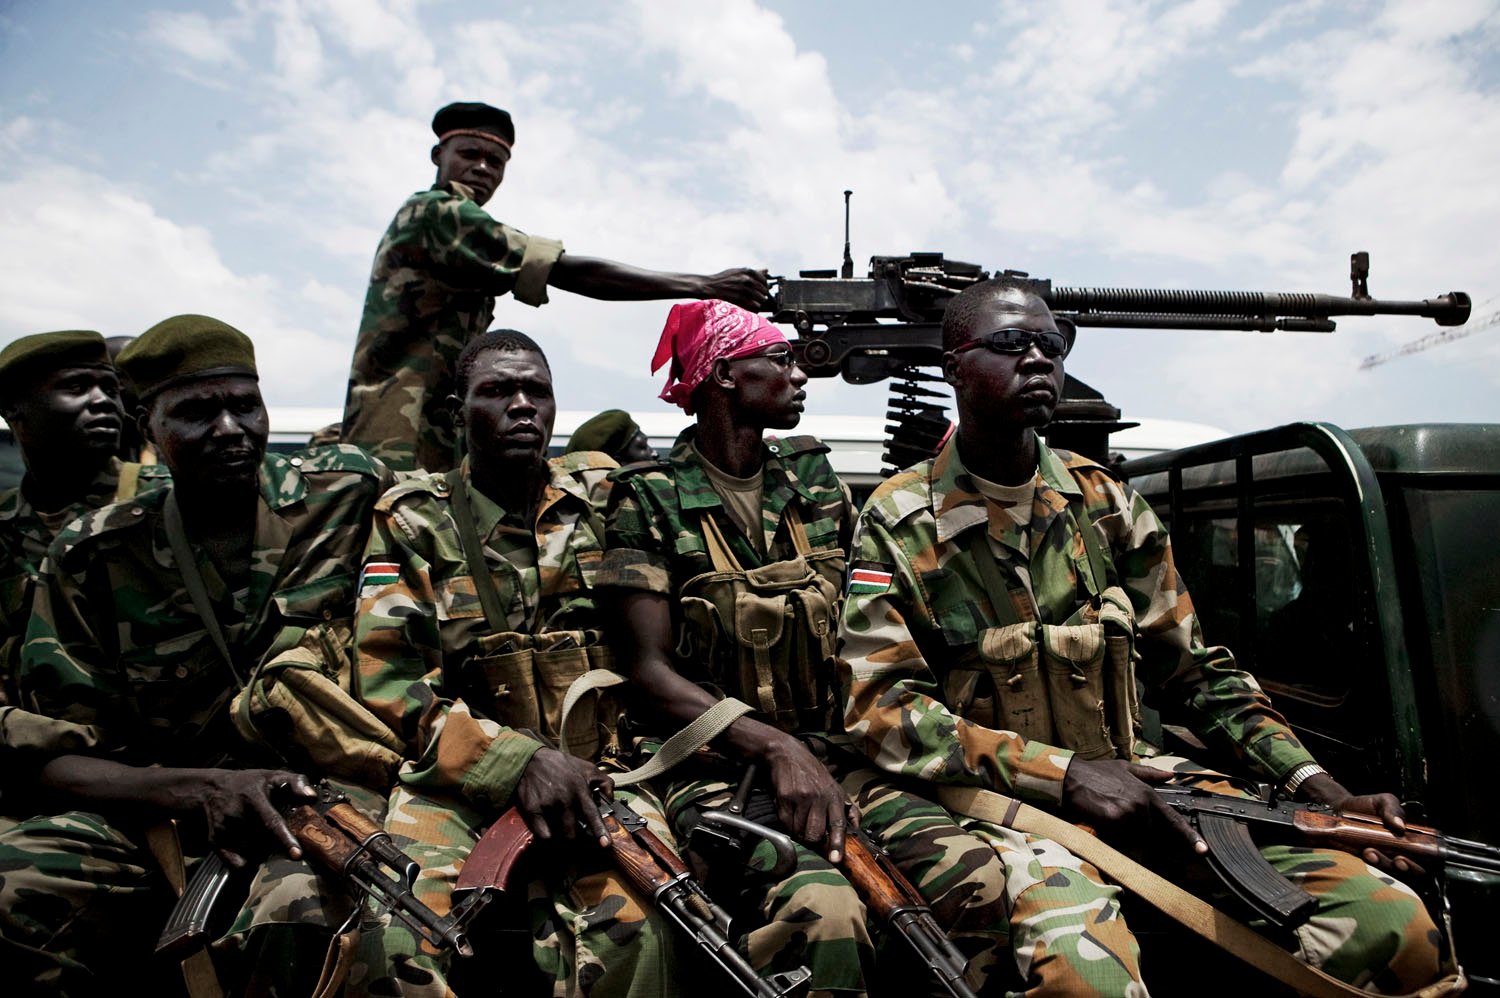  Heavily armed members of the Sudan People's Liberation Army, the main rebel movement that battled northern Sudanese forces from 1983-2005. Now functioning as the national army, the SPLA struggles to transform from a guerilla to a professional fighti